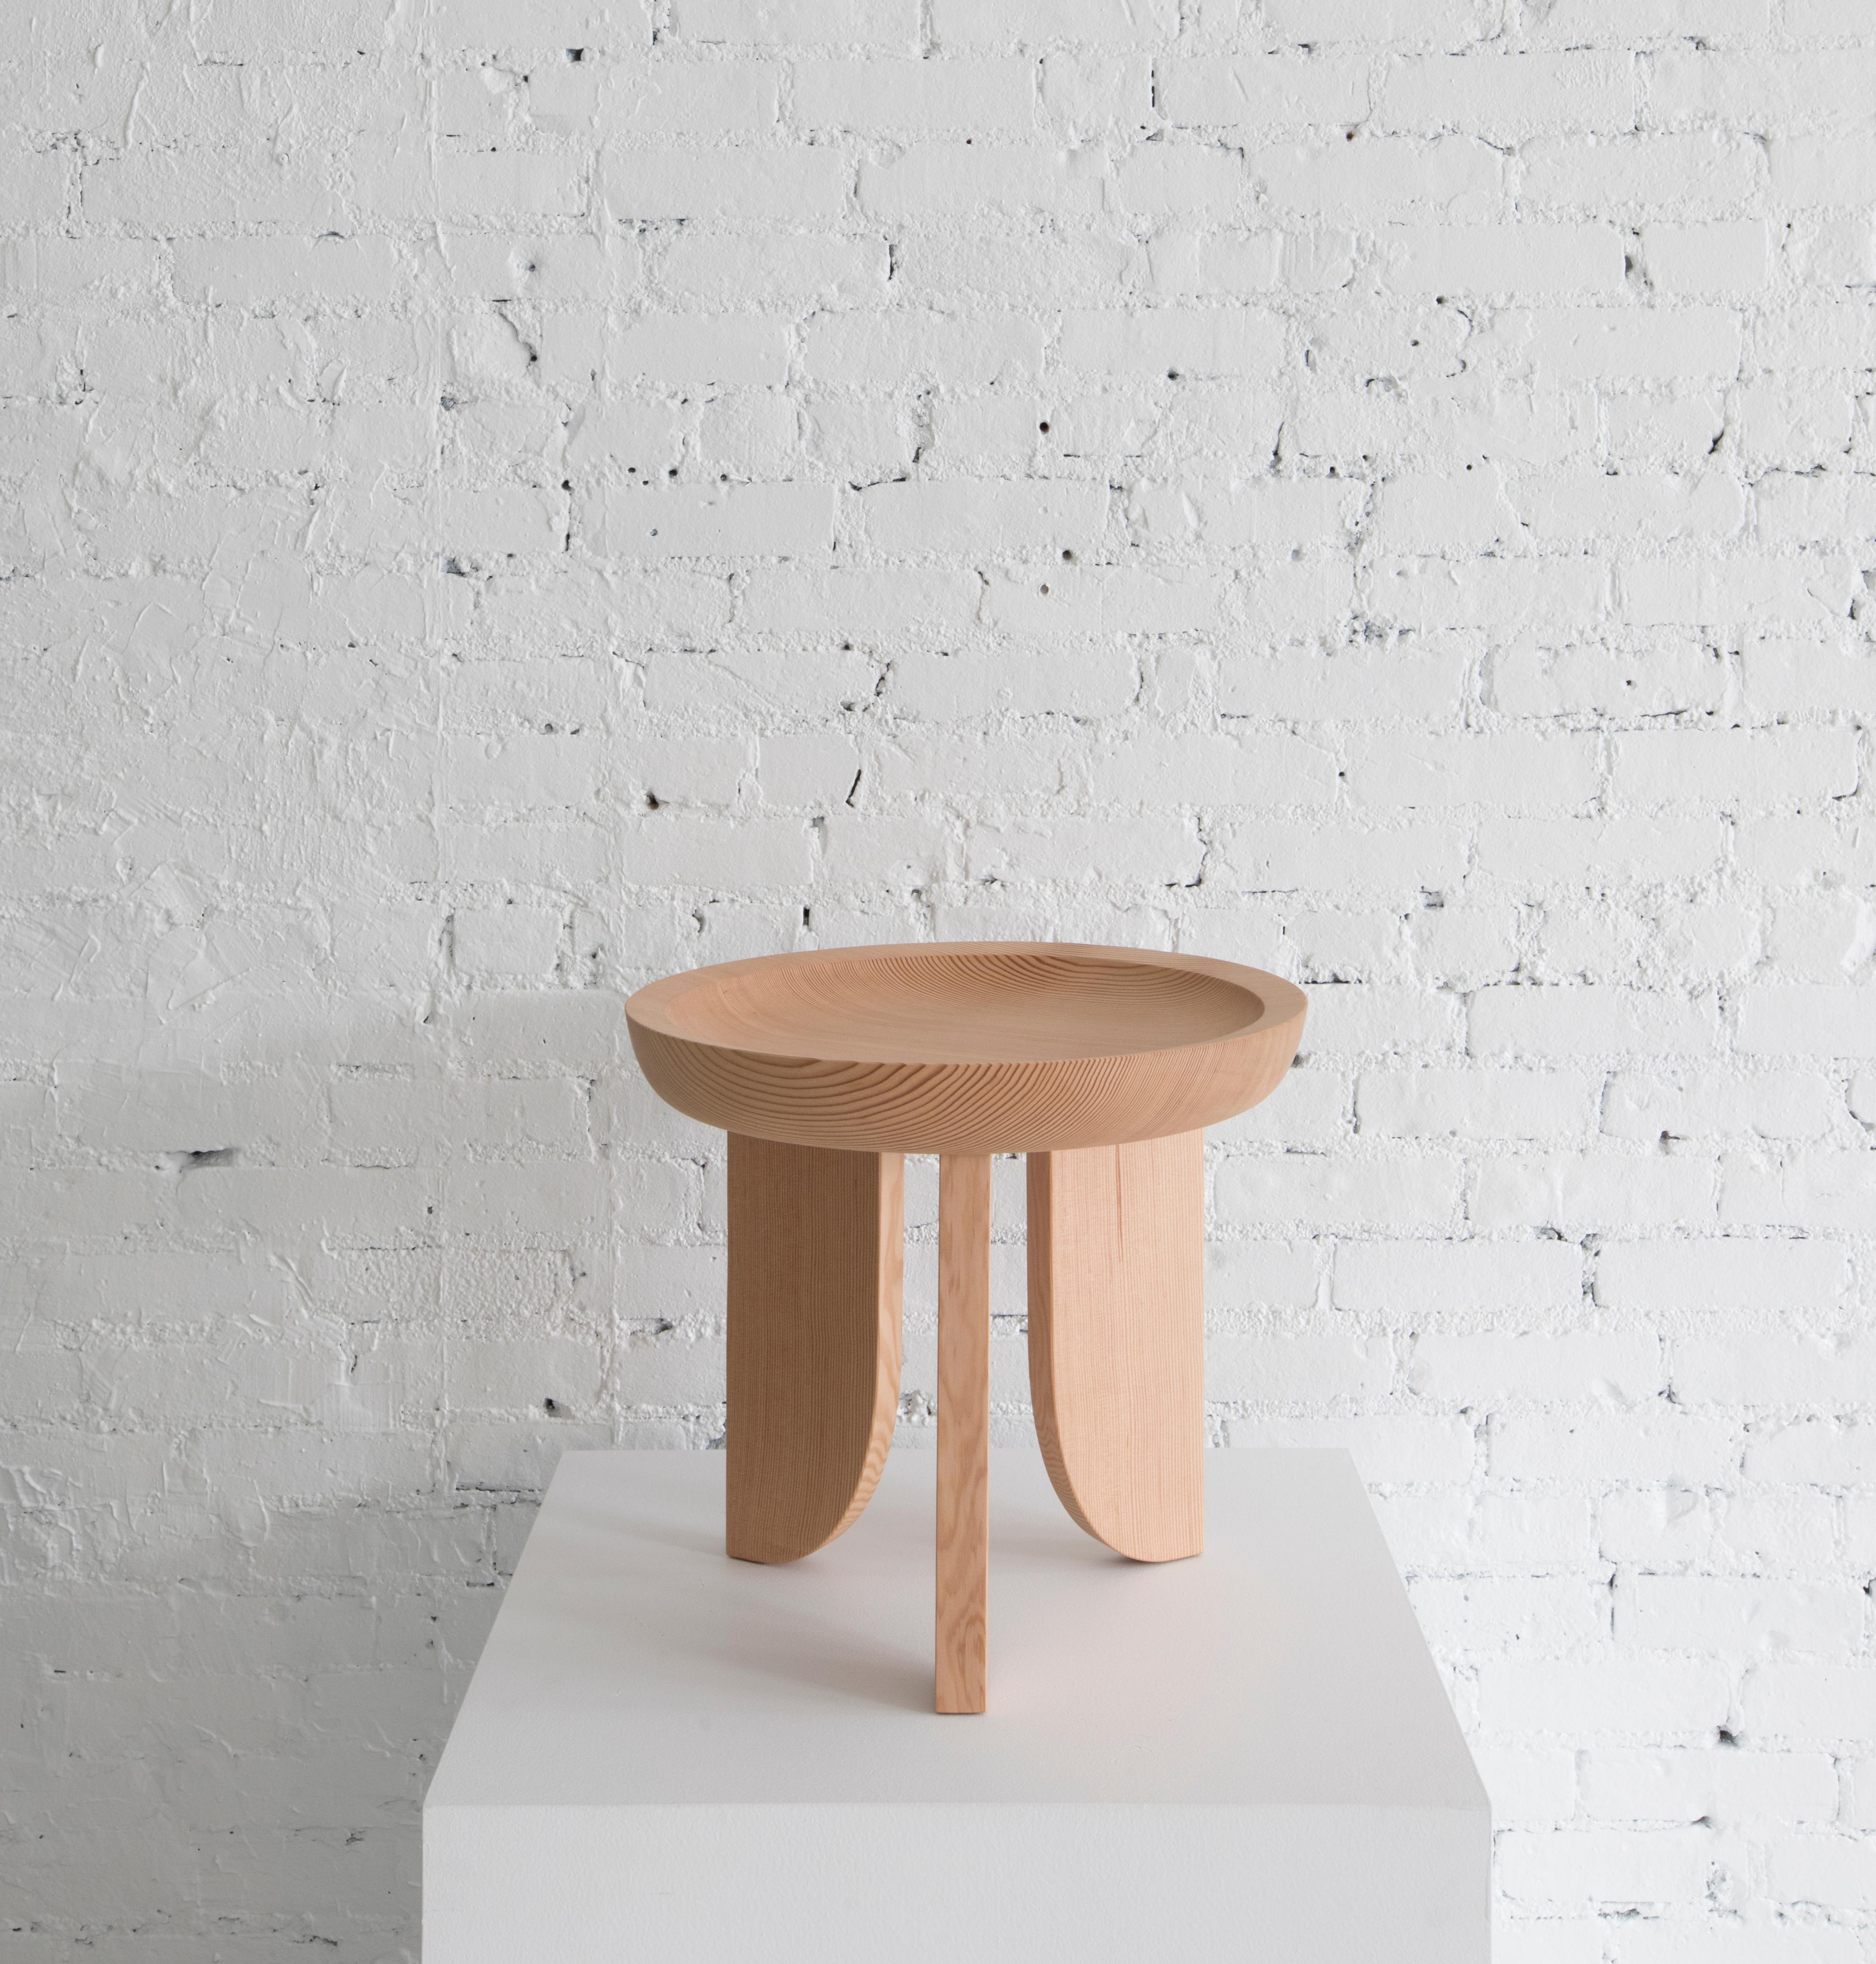 A limited edition run of our well known Dish Side Table made from twice reclaimed Northwest old growth fir to commemorate our ten year studio anniversary.

Built in the USA from solid fir. Side table also doubles as a stool. Only ten branded and